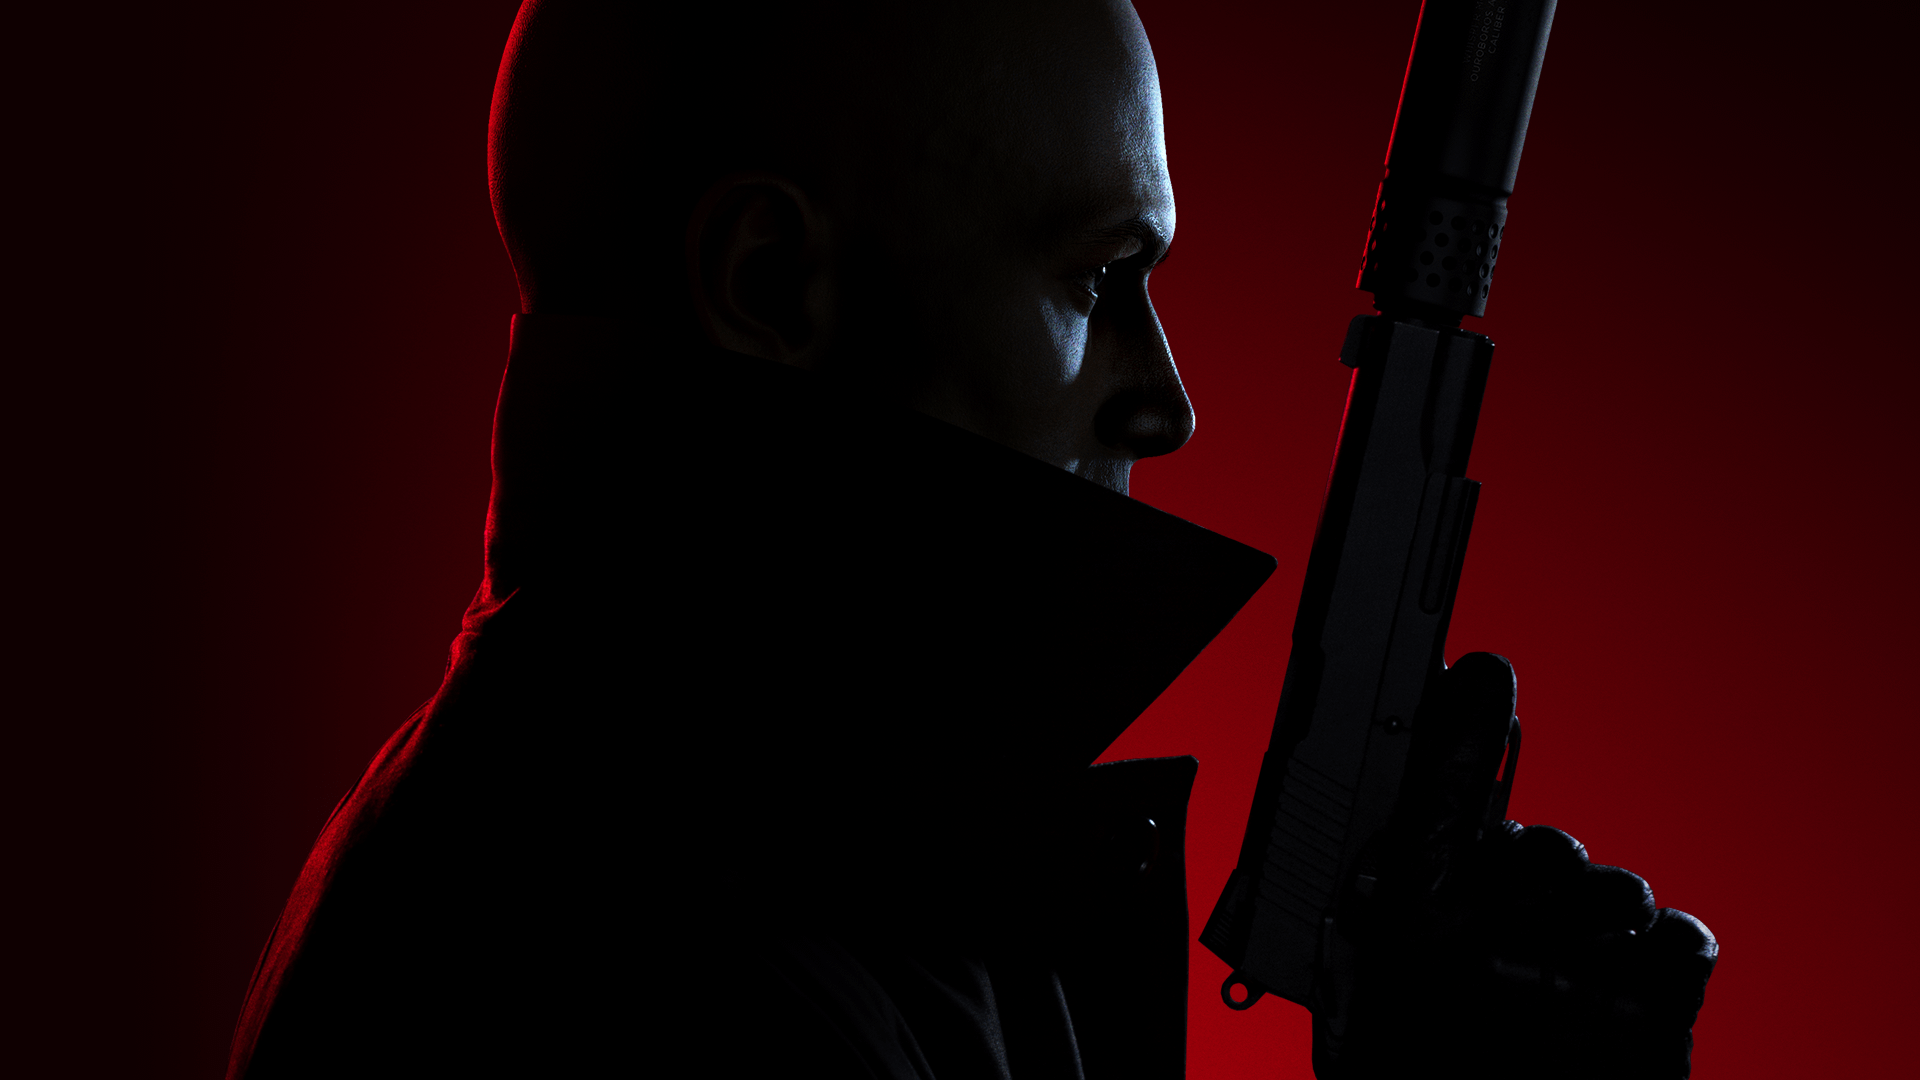 Review: Hitman 3 is the peak of the trilogy